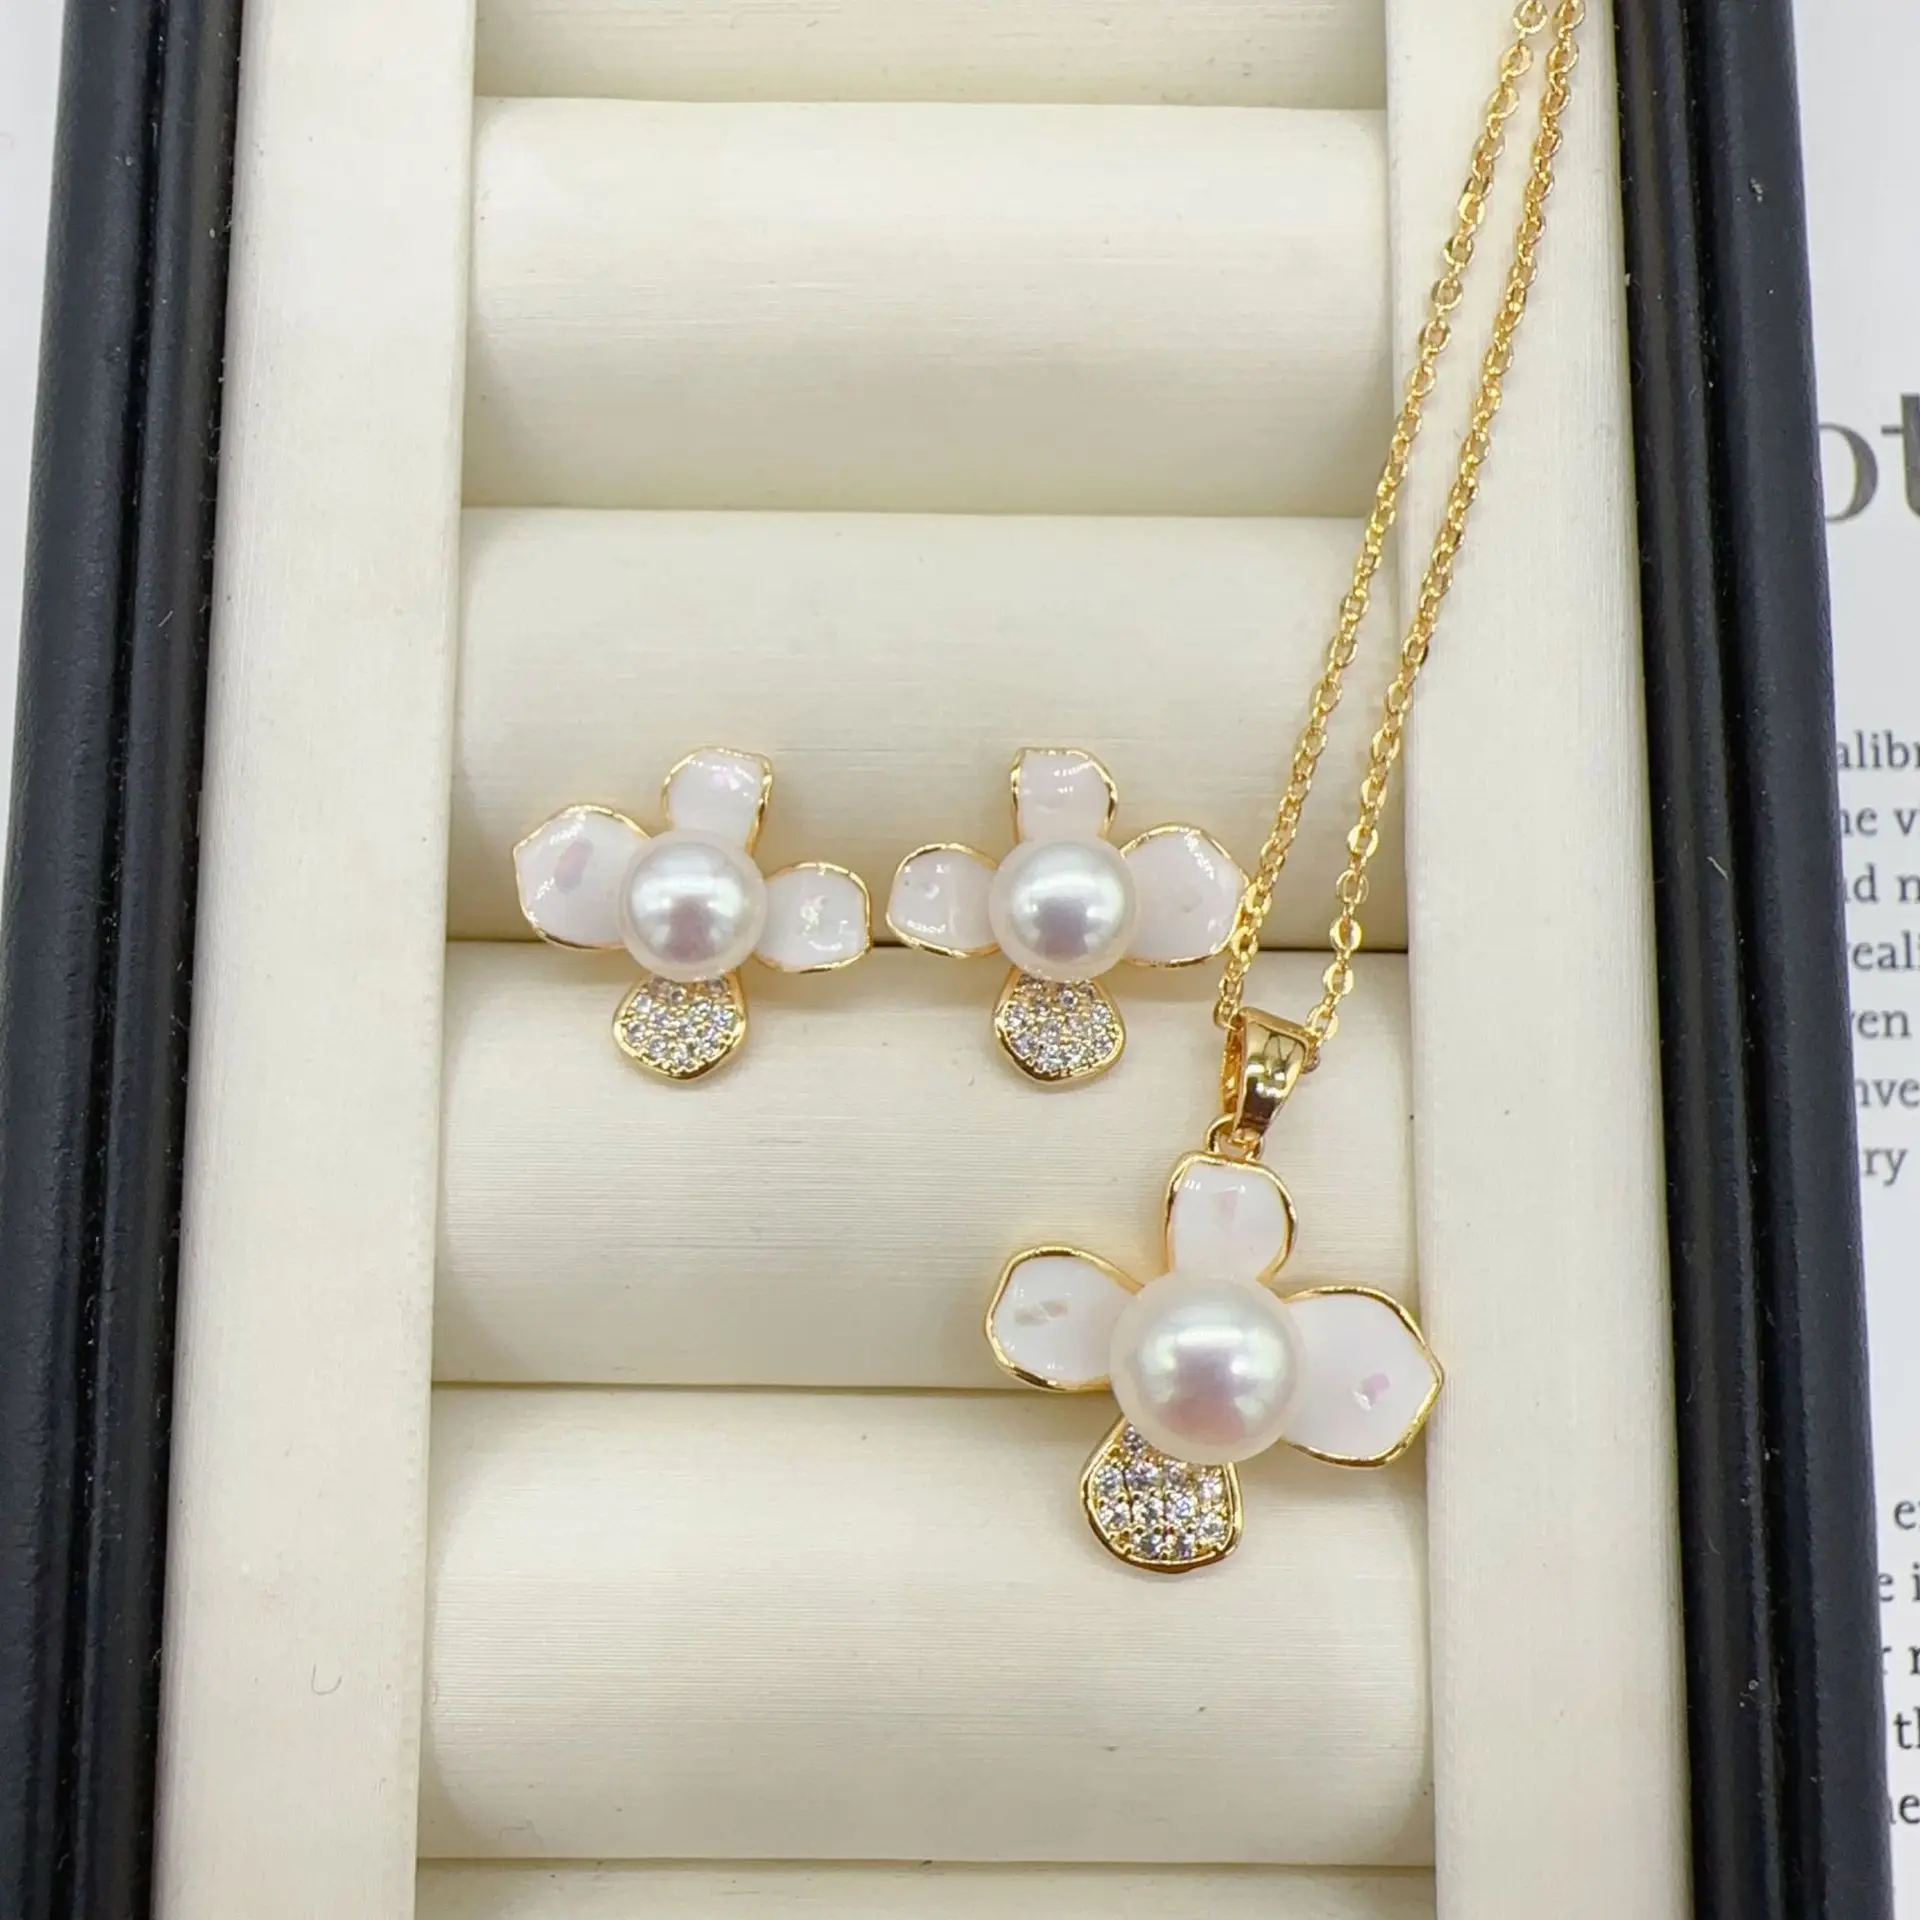 

Hot Sale Sweet Four-petal Flower Design Pearl Jewelry Sets 14k Gold Filled Natural Freshwater Pearl Necklace Earrings For Women